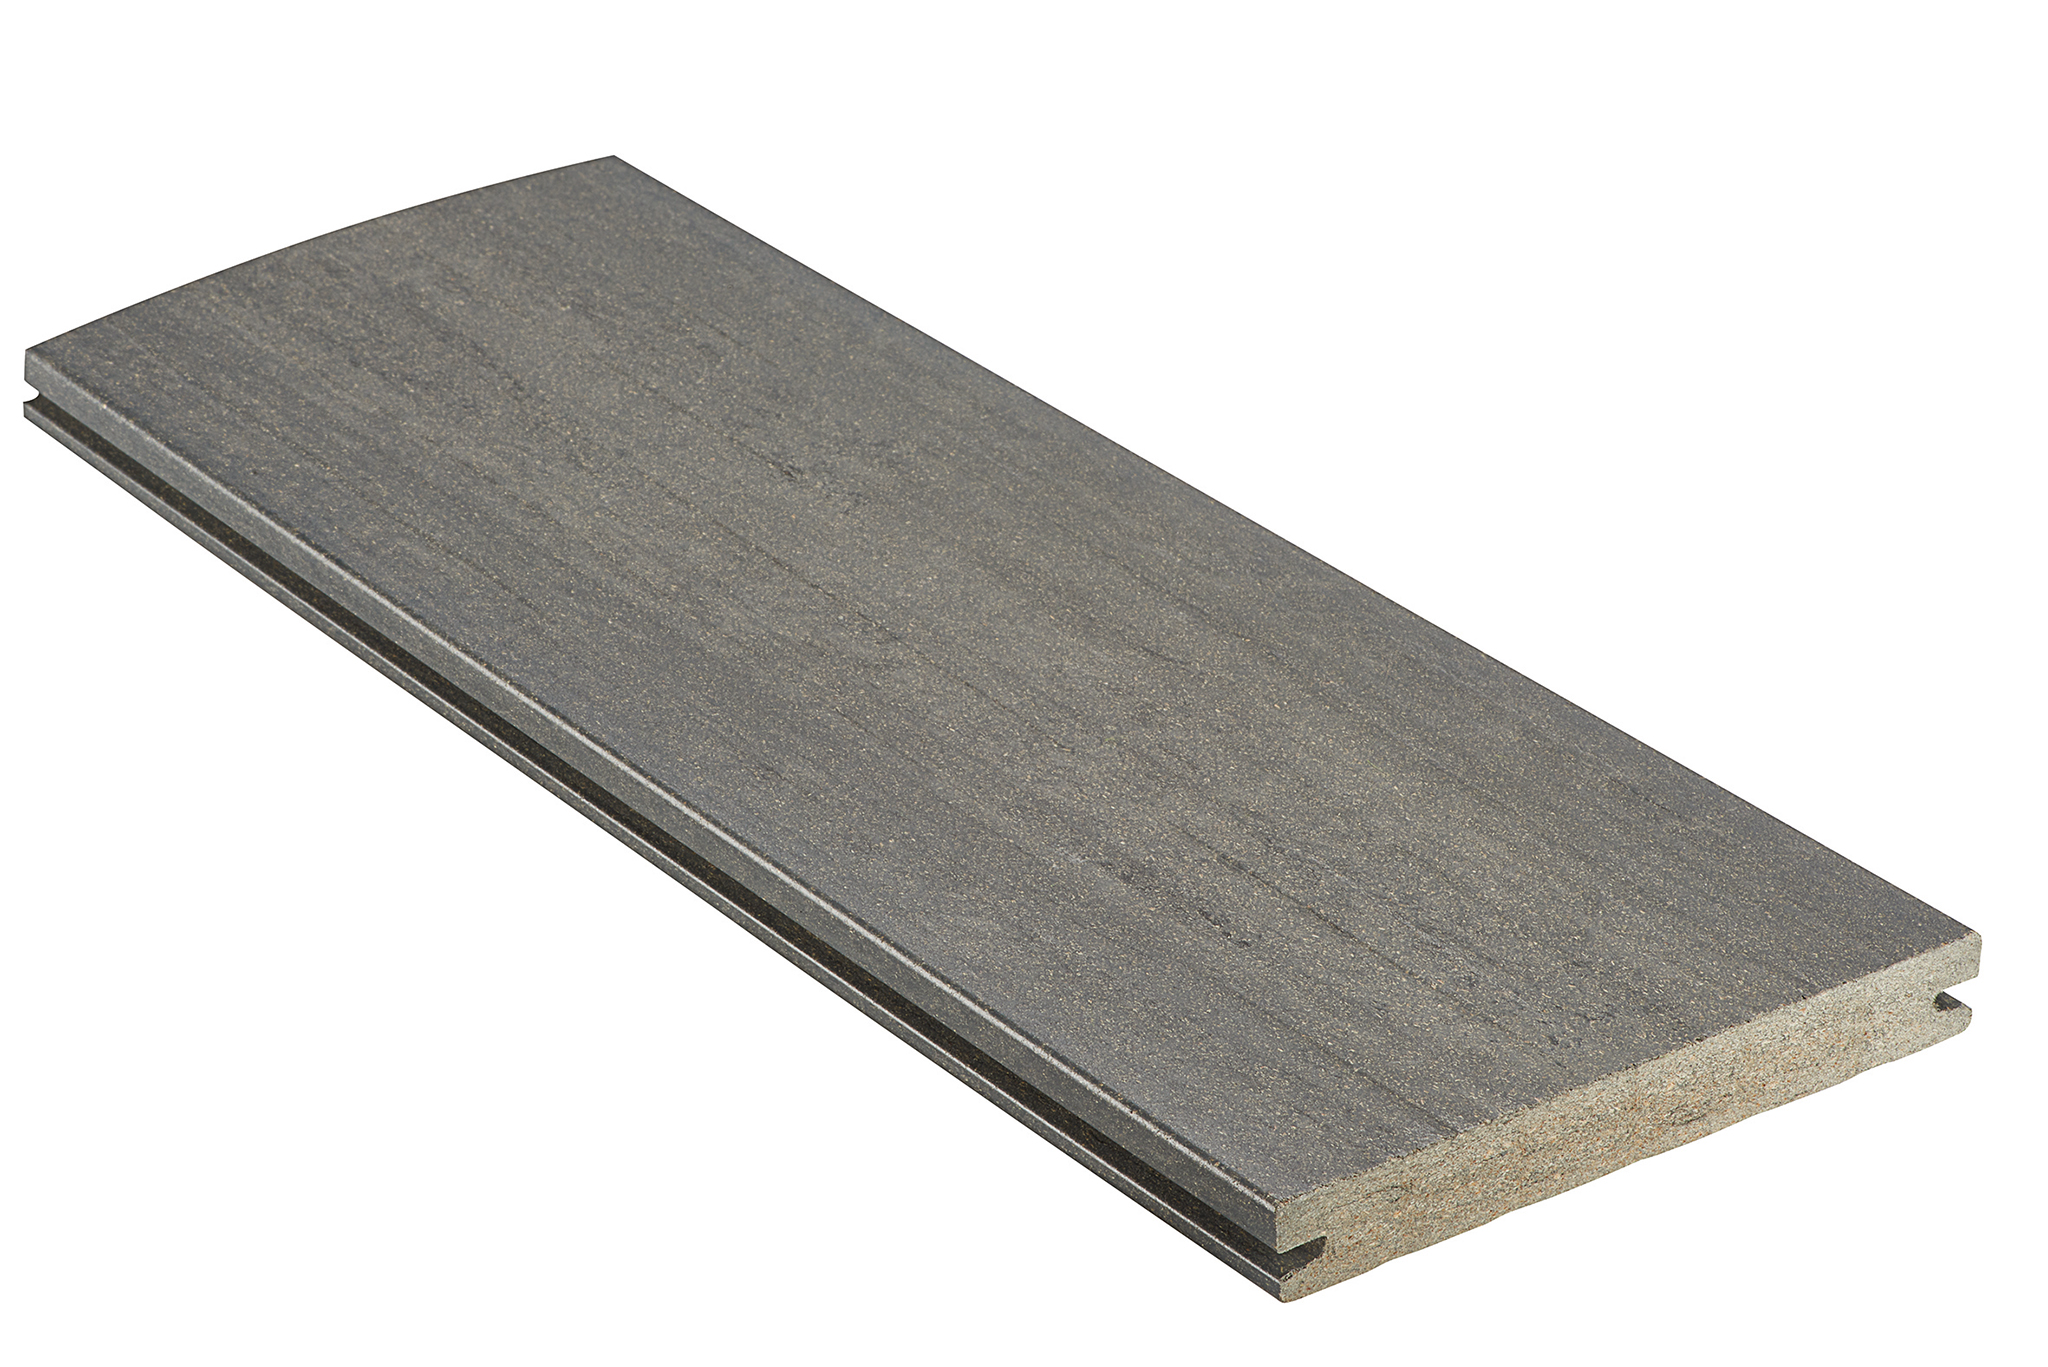 THE EXCLUSIVE WPC solid floorboard